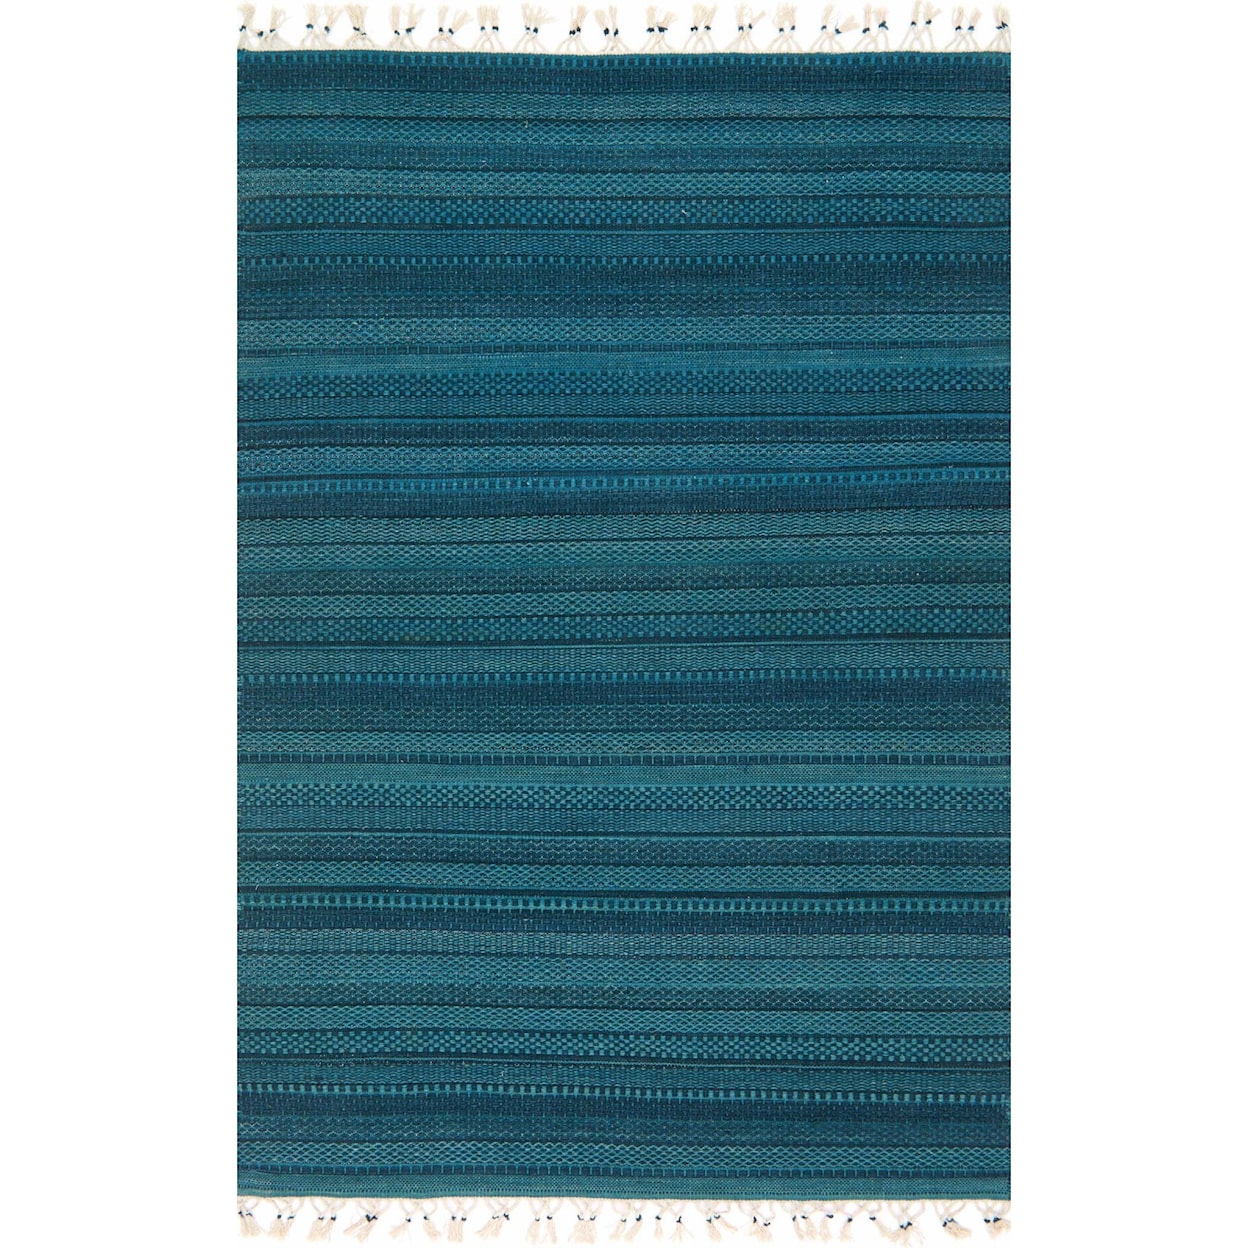 Magnolia Home by Joanna Gaines for Loloi Mikey 7' 9" x 9' 9" Rectangle Rug